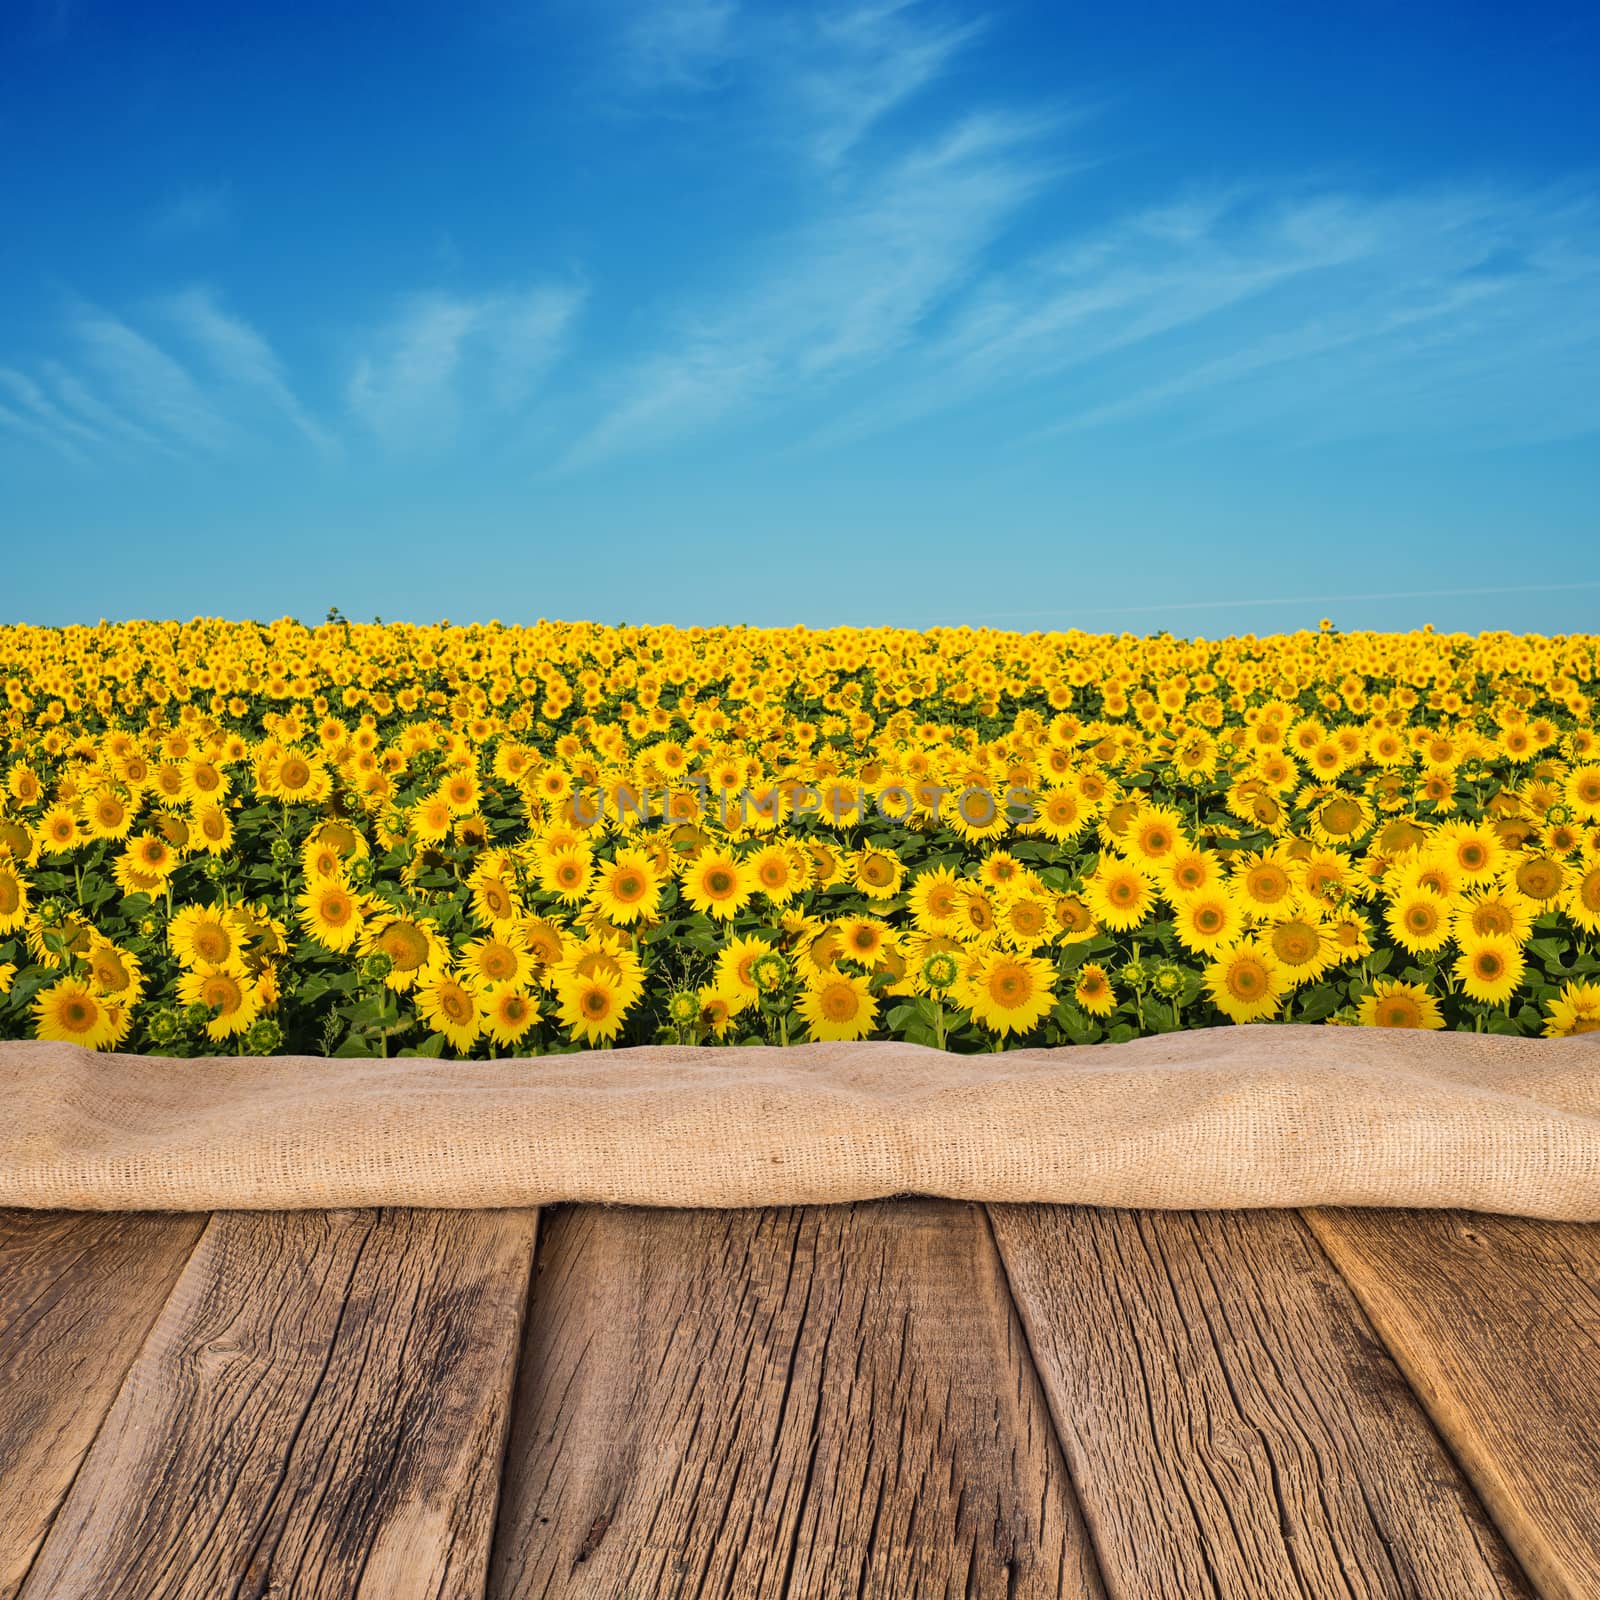 empty wooden table in sunflower field with blue sky. the backgro by DGolbay